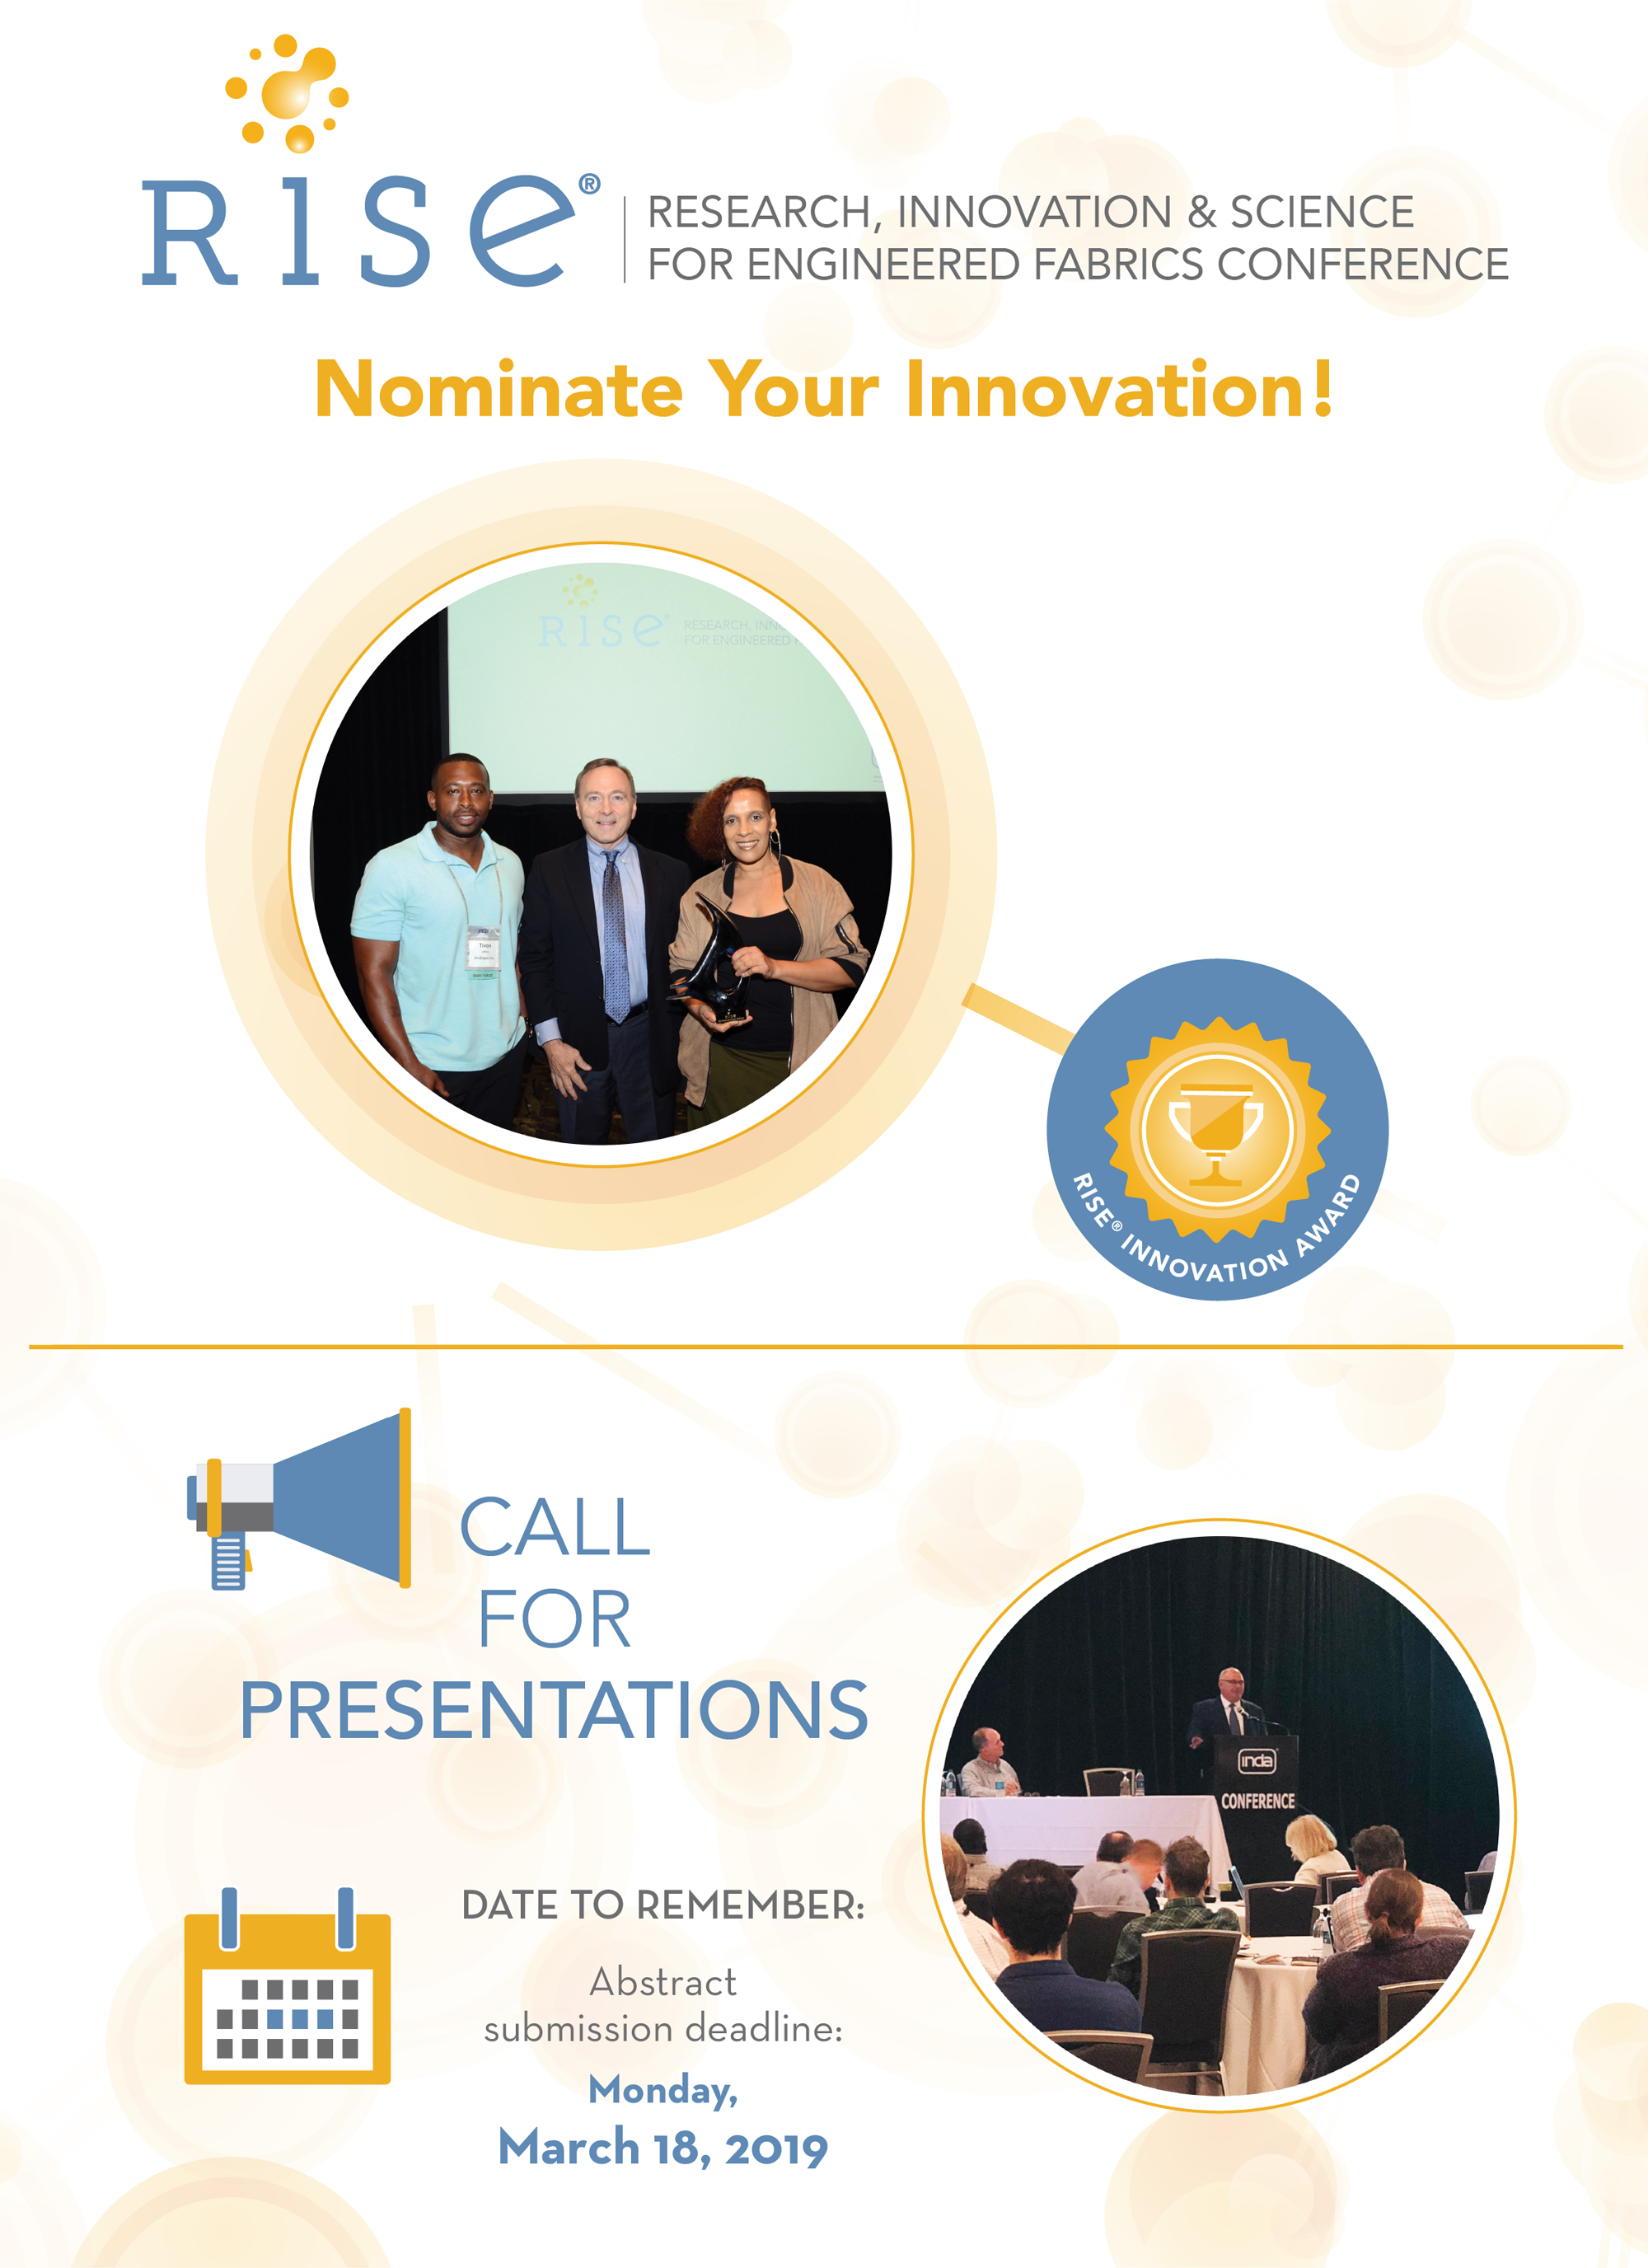 INDA is calling for presentations for RISE 2019 and nominations for its RISE Innovation Award.